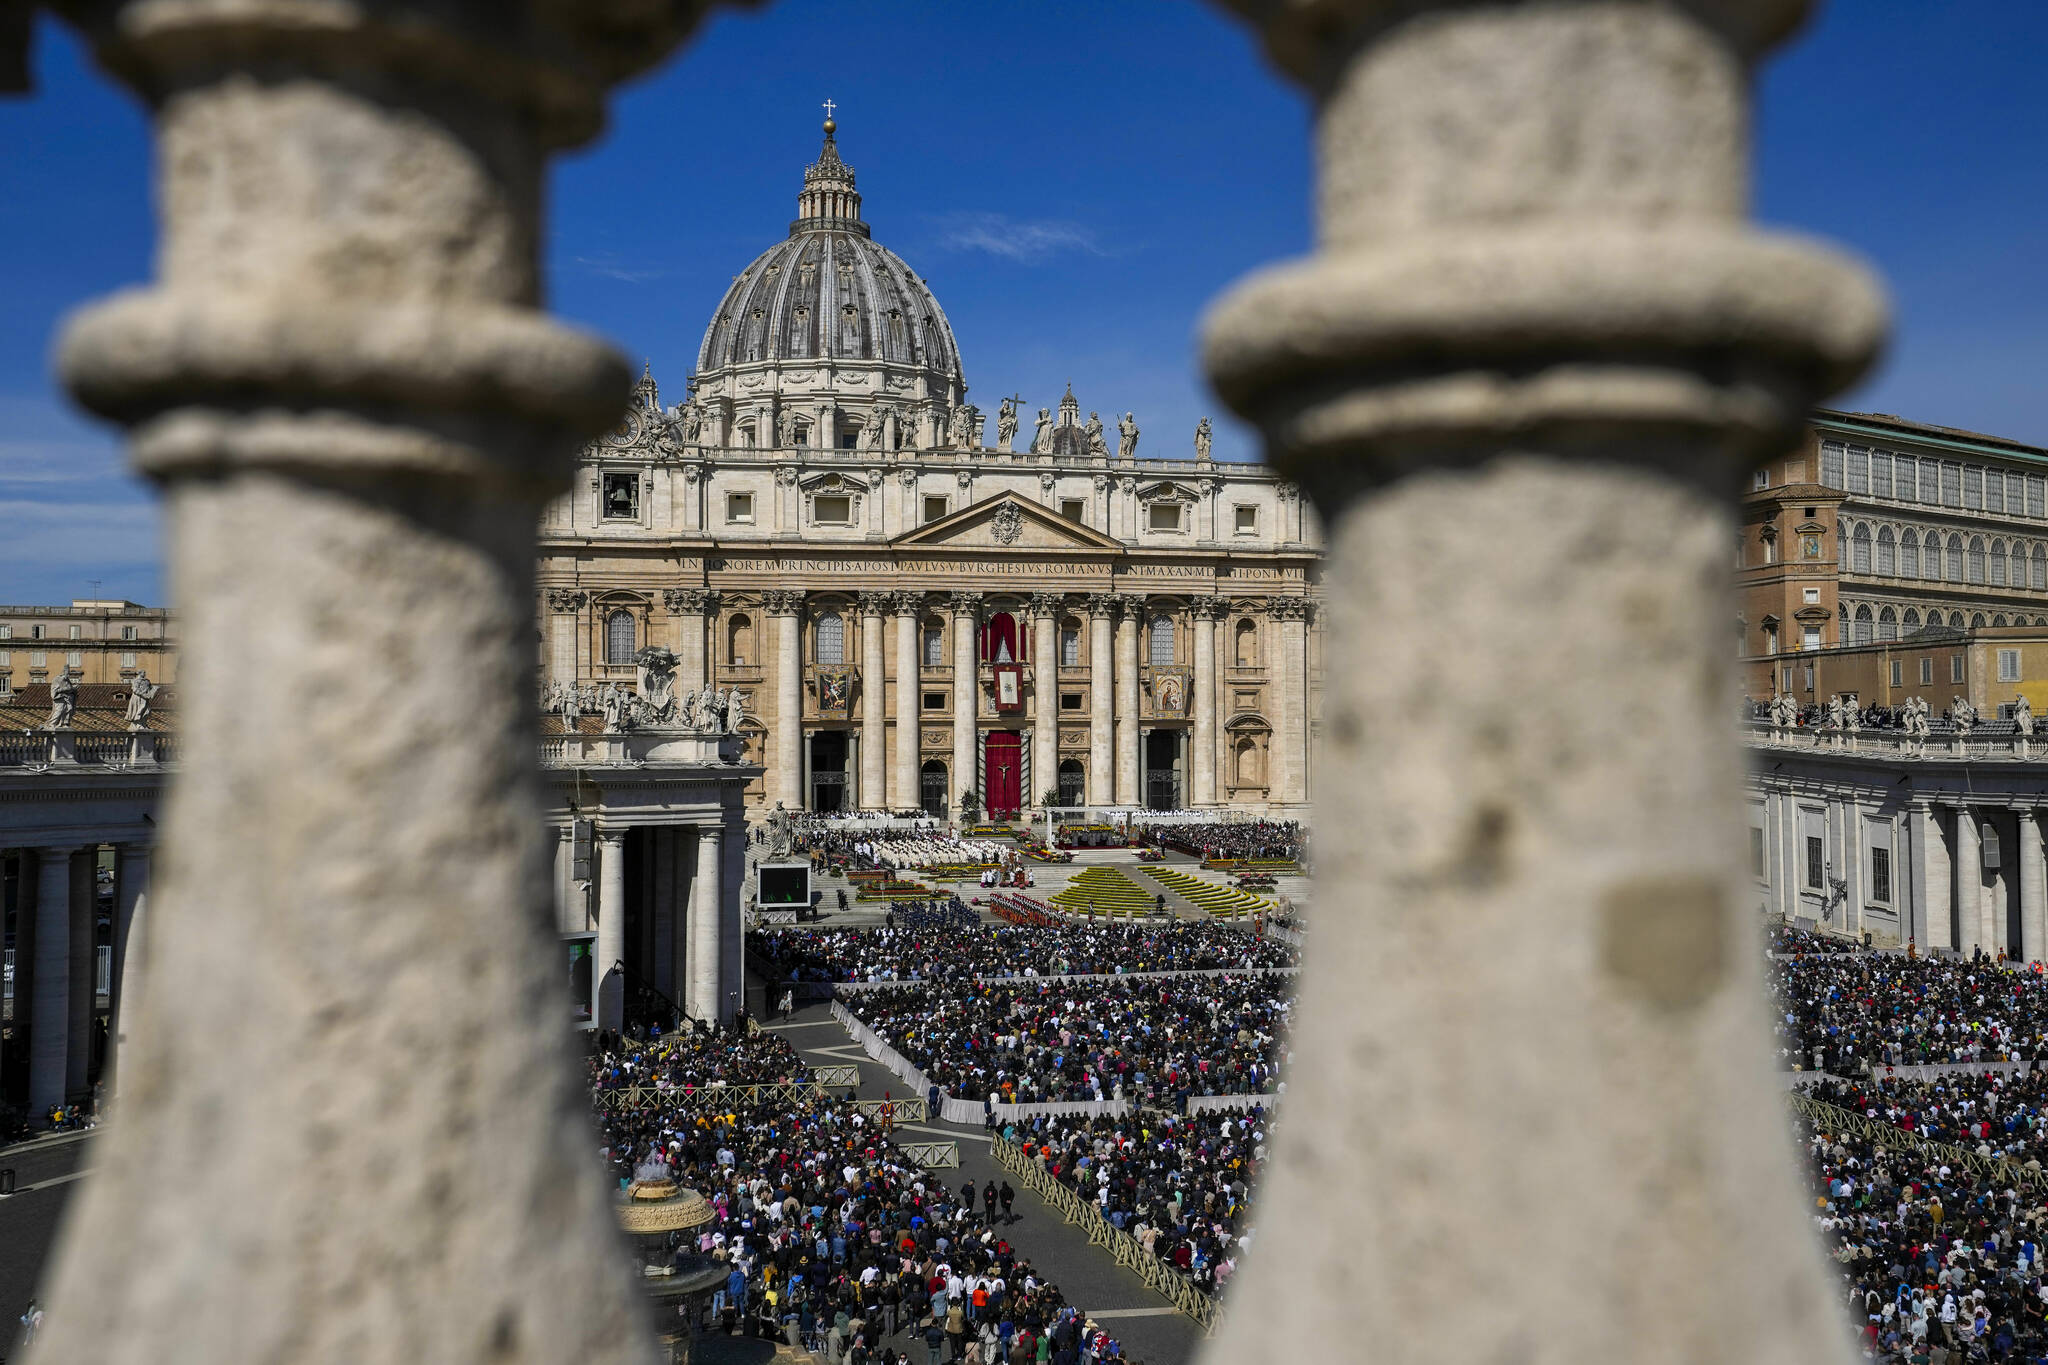 Faithful gather to attend the Catholic Easter Sunday mass led by Pope Francis in St. Peter’s Square at the Vatican, Sunday, April 17, 2022. For many Christians, this weekend marks the first time in three years they will gather in person to celebrate Easter Sunday. (AP Photo/Alessandra Tarantino)